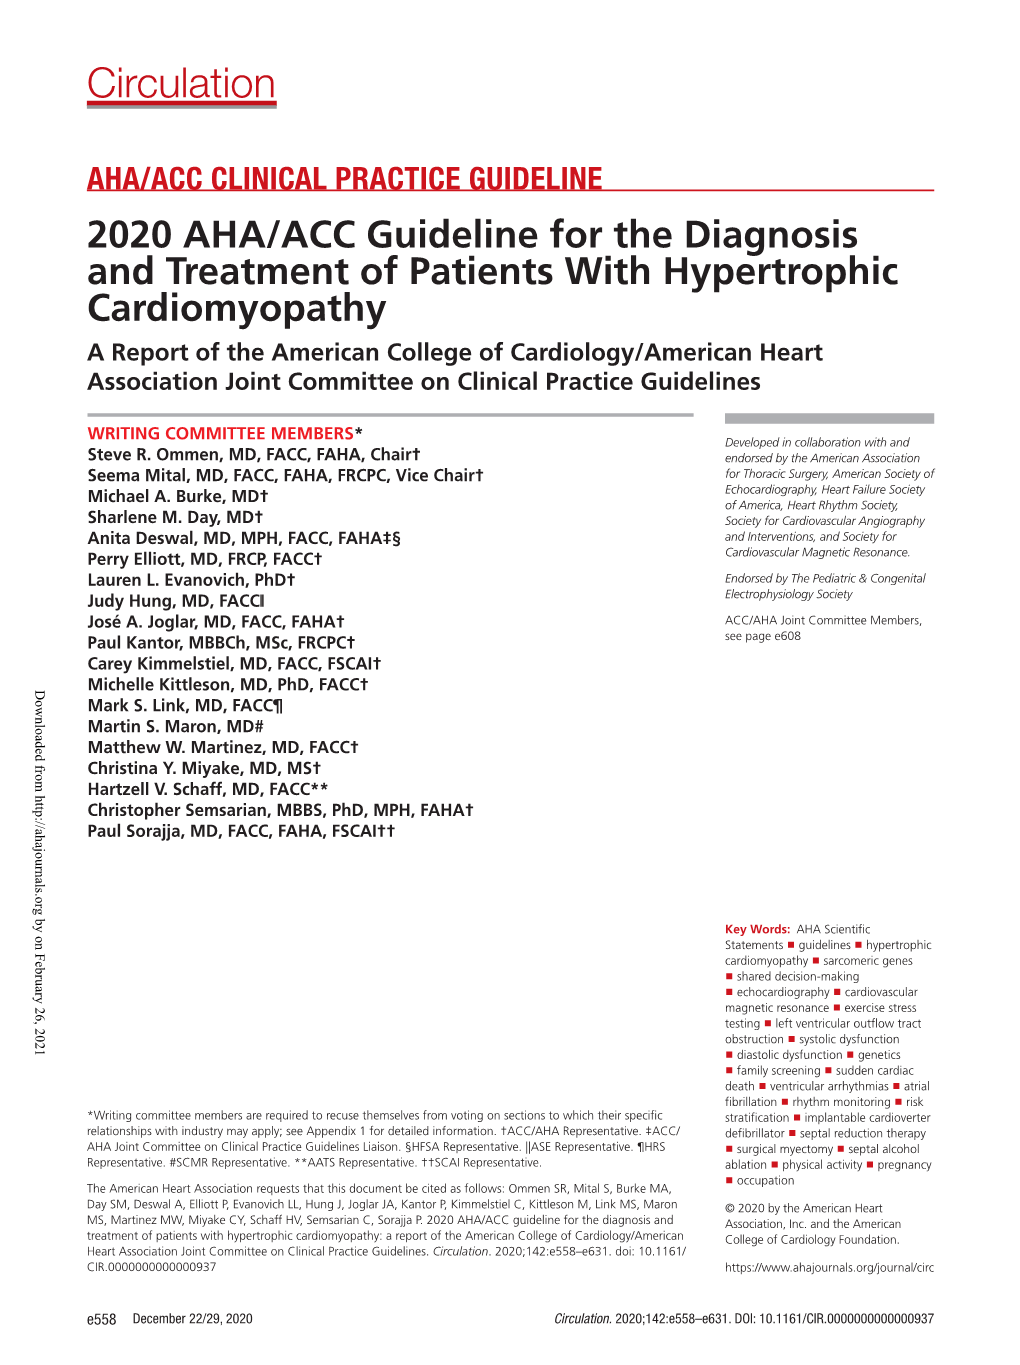 2020 AHA/ACC Guideline for the Diagnosis and Treatment Of